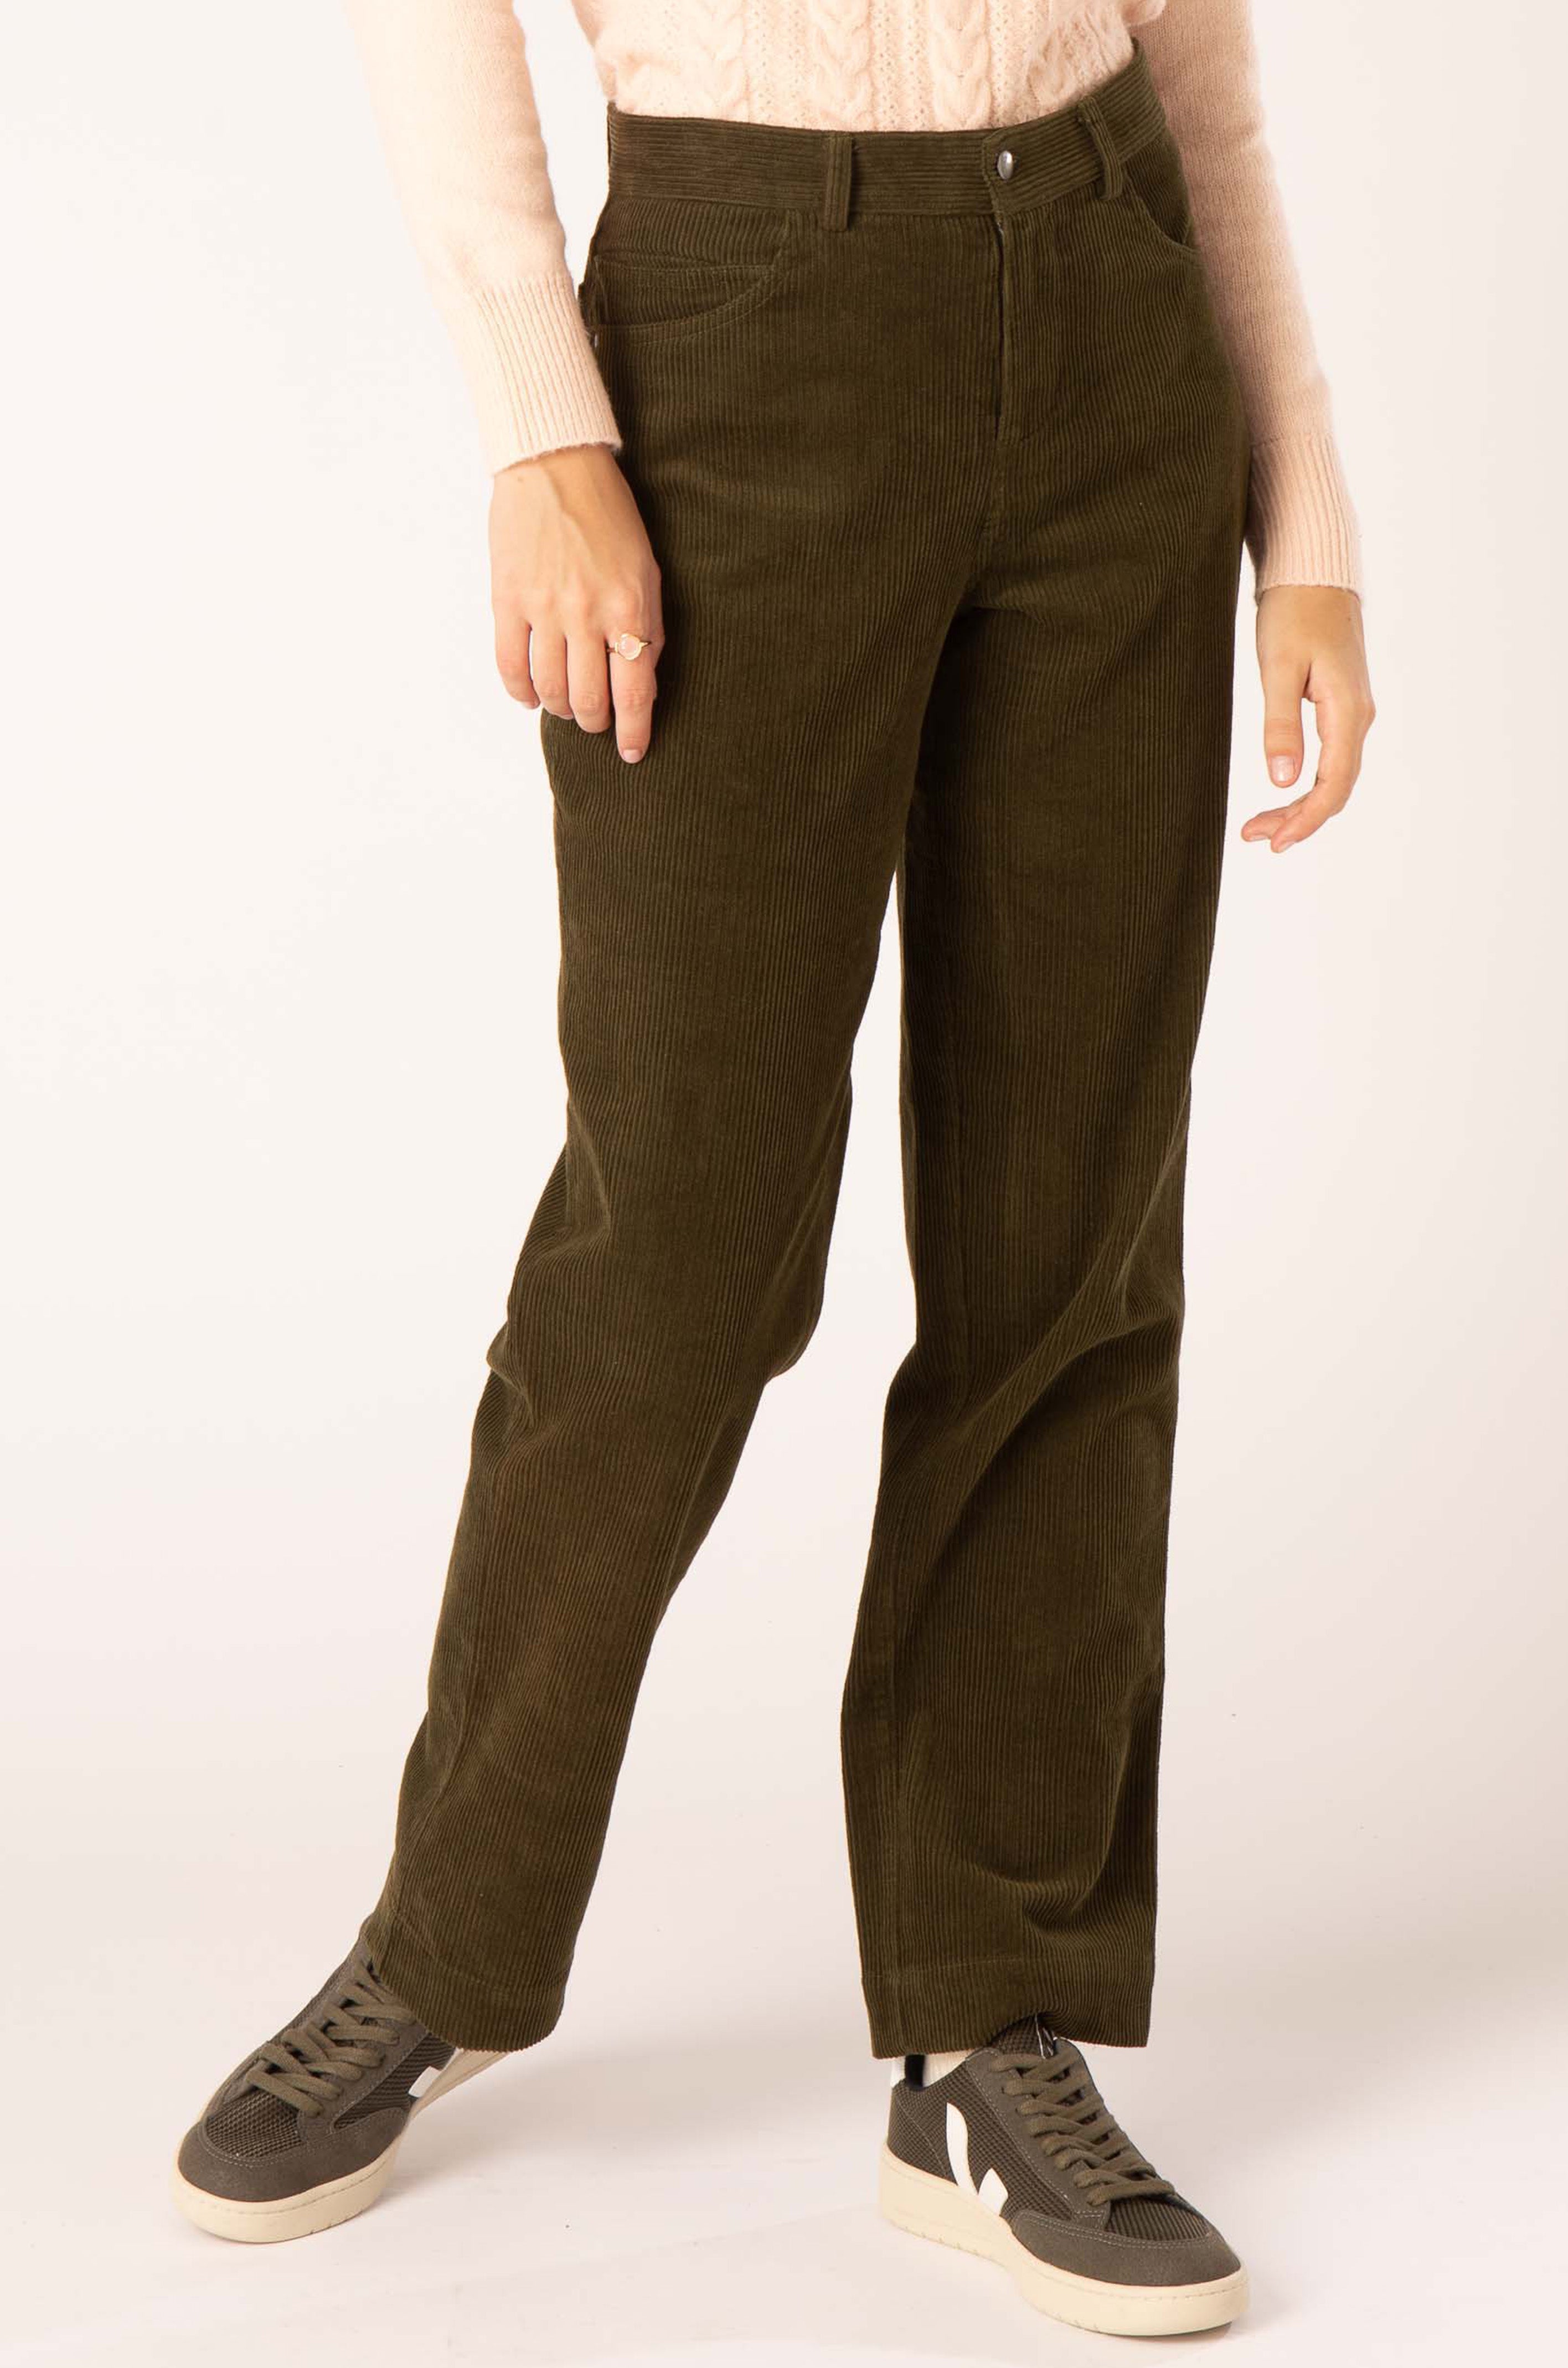 Cord Trouser in Military Olive, Military Olive / 10